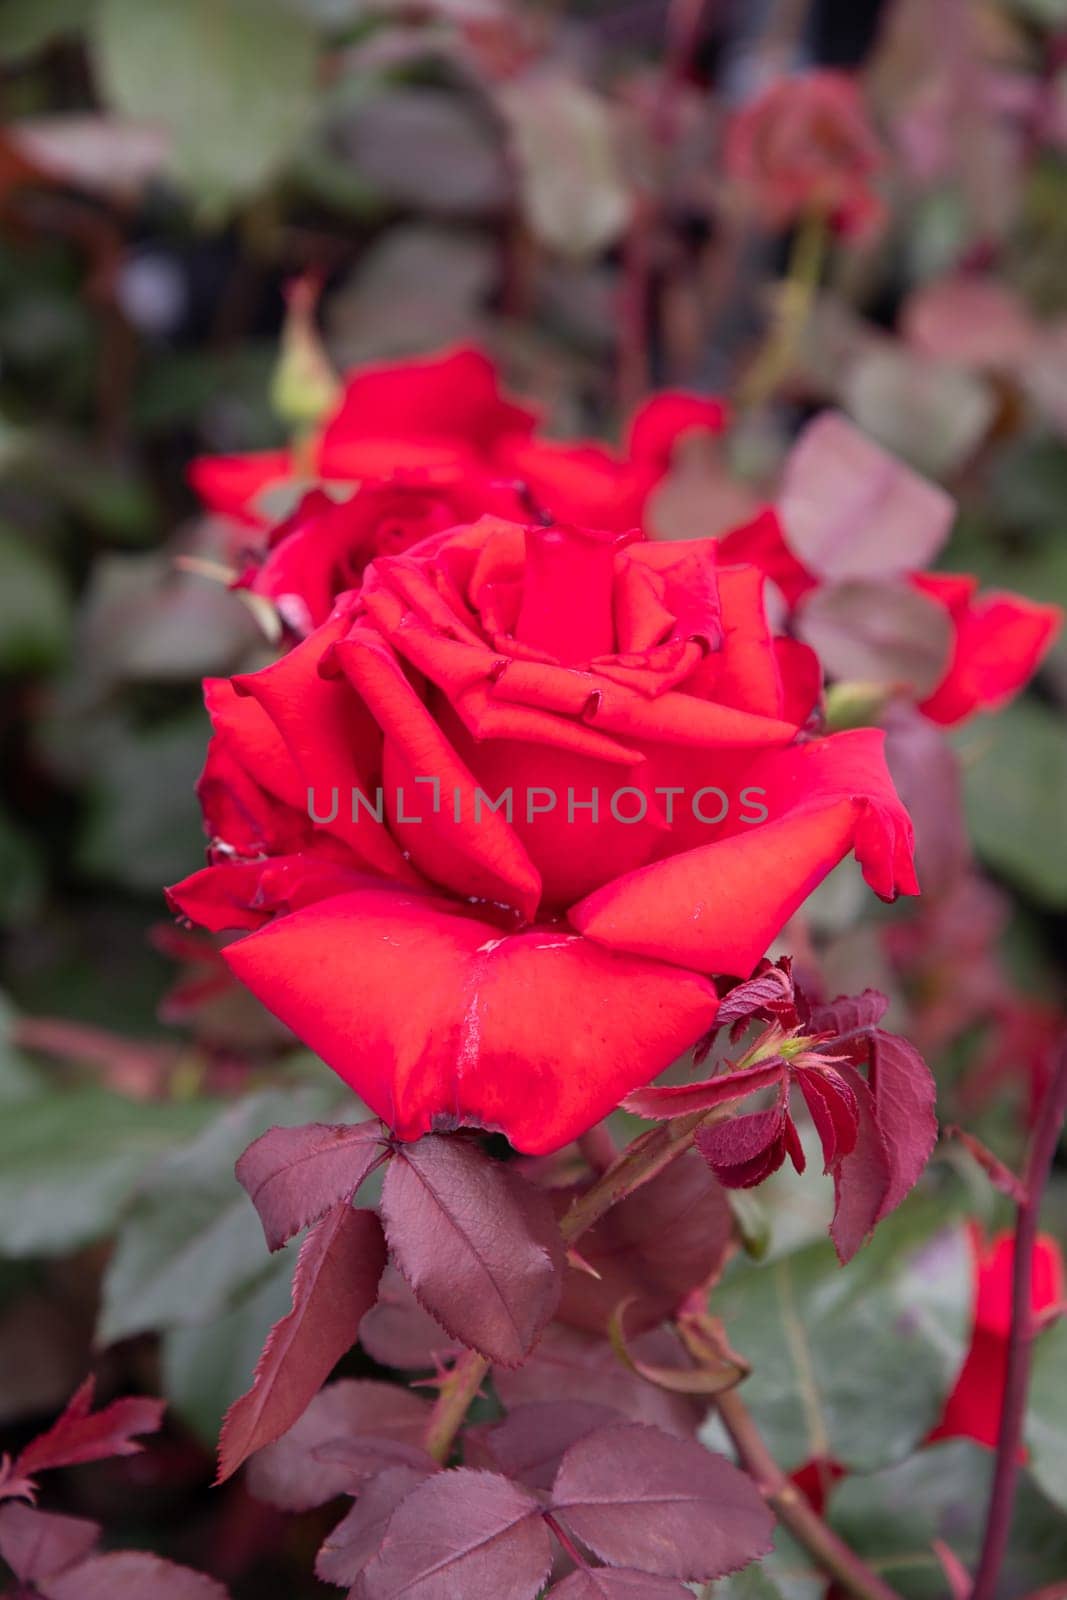 two delicate red roses in full bloom against the background of green leaves, close-up botanical photo, garden decor, high quality photo